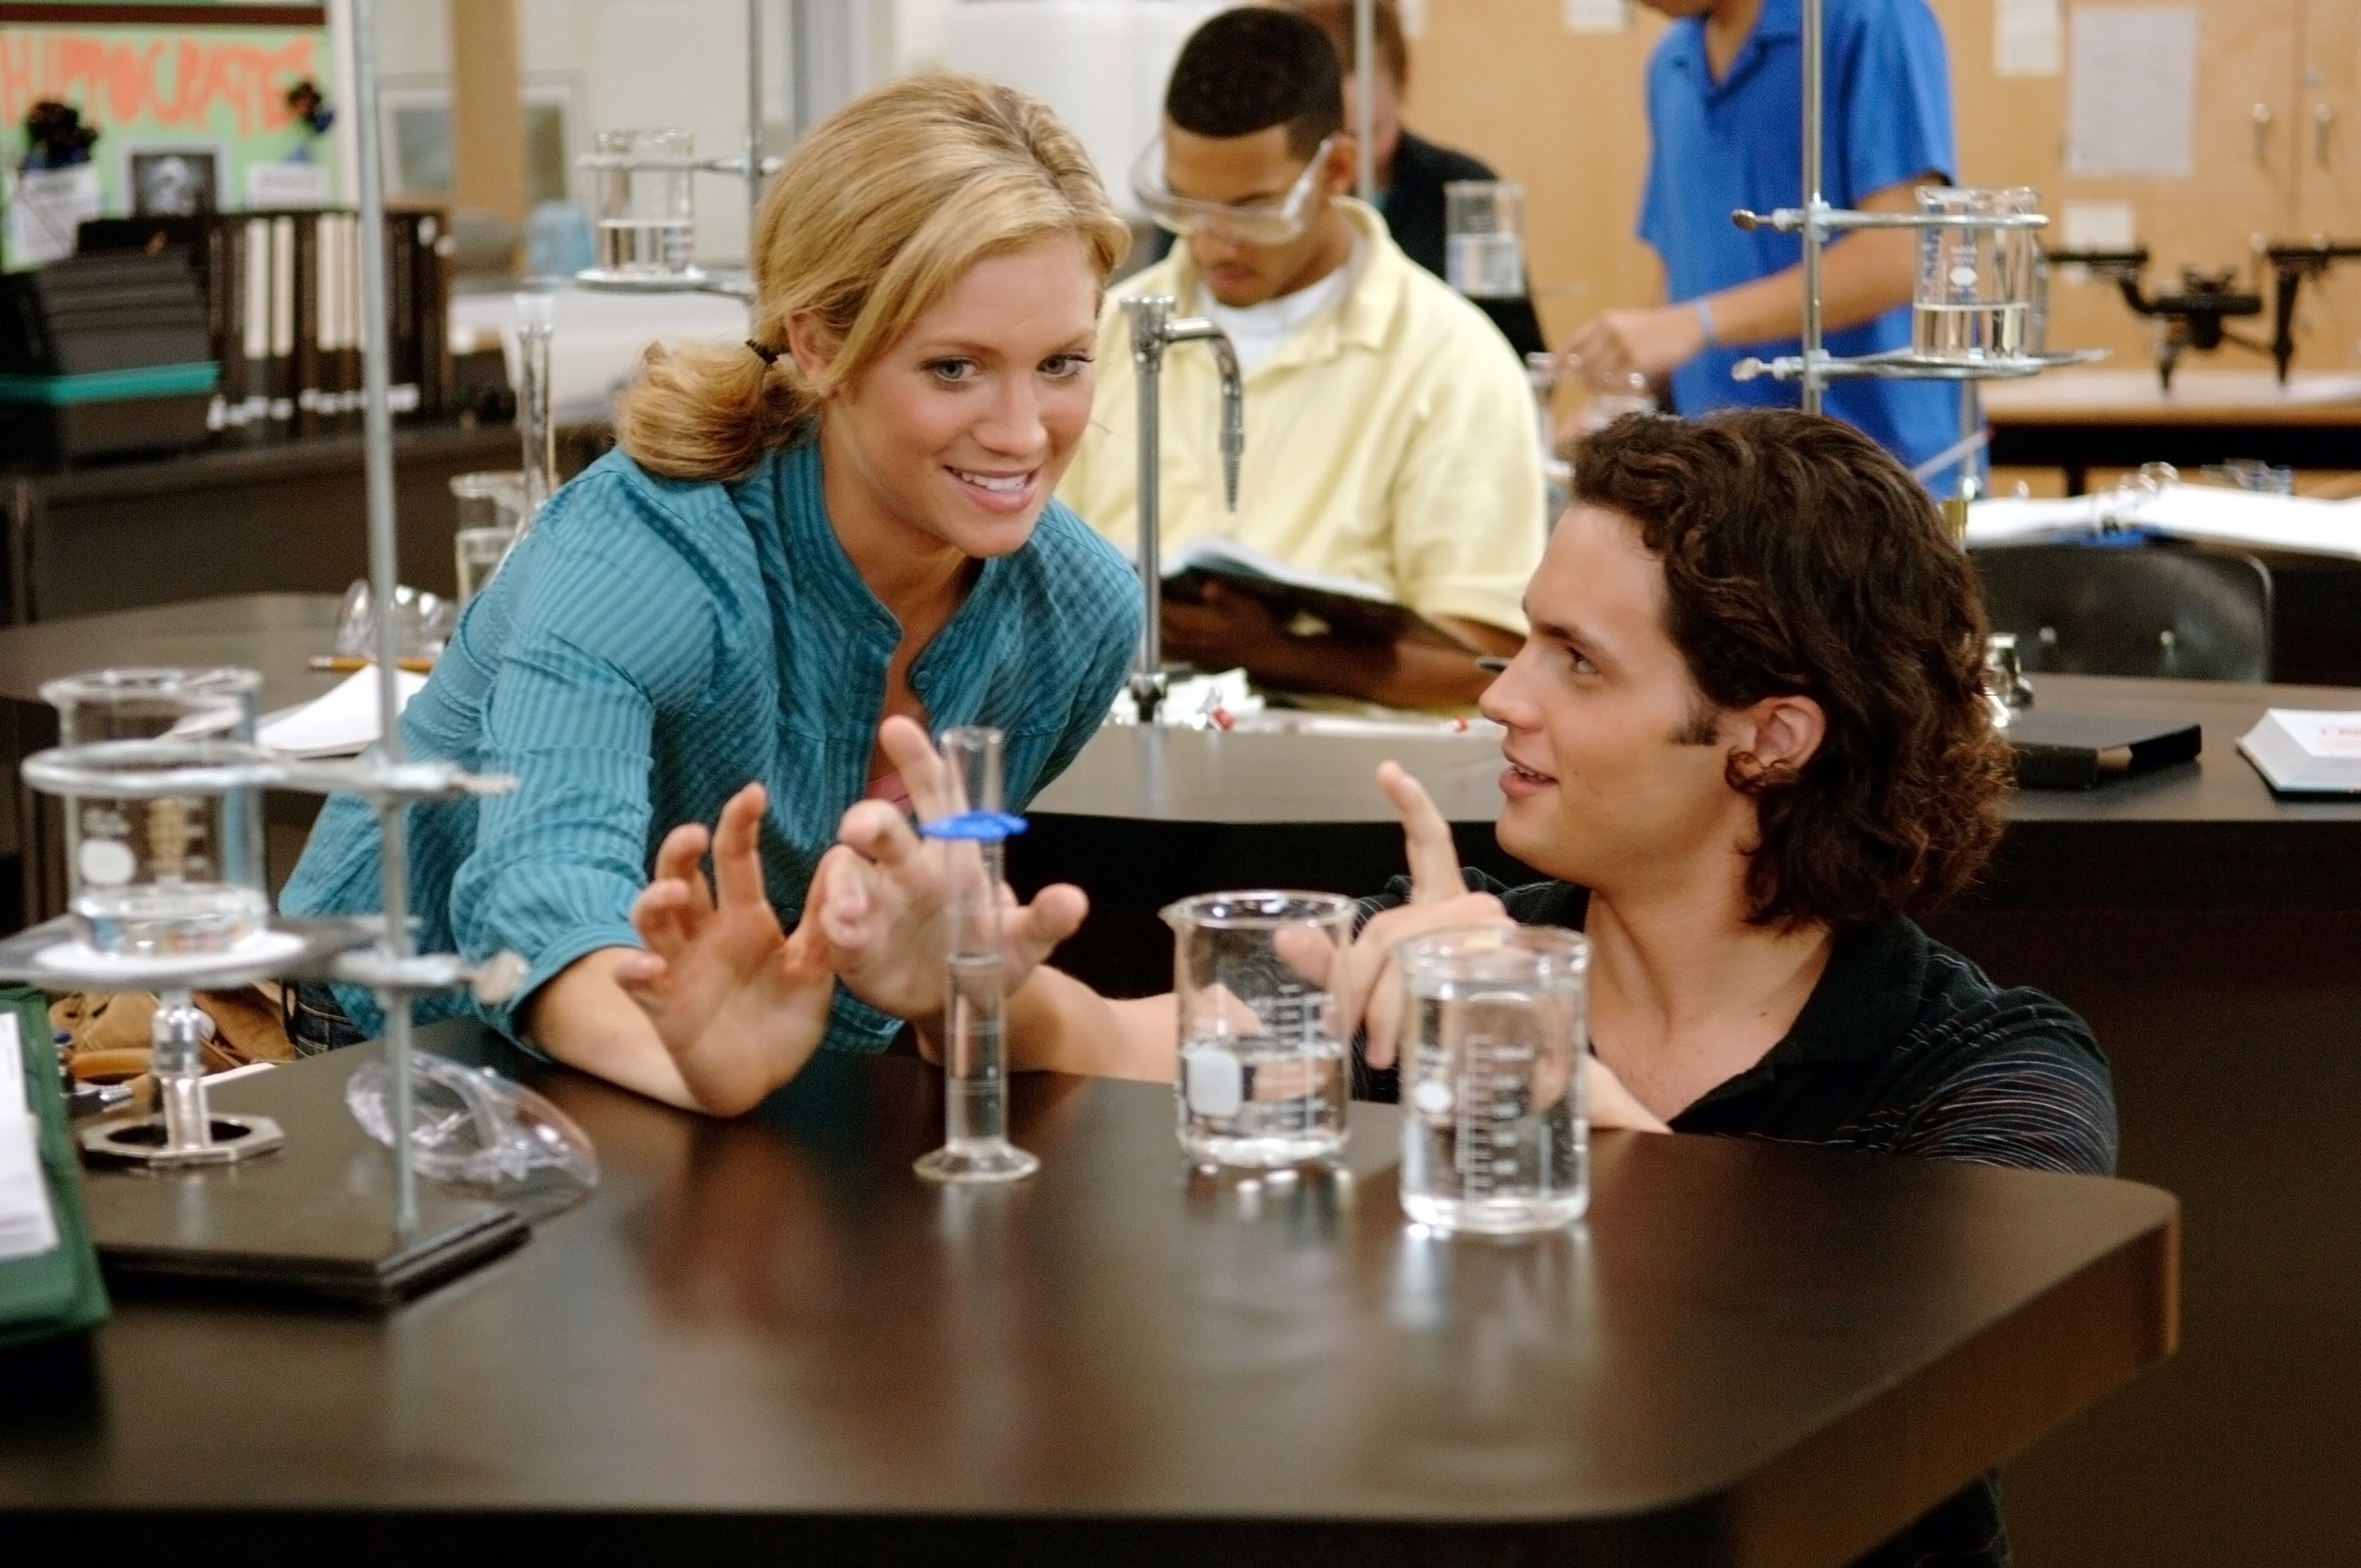 Brittany Snow and Penn Badgley at a science desk.